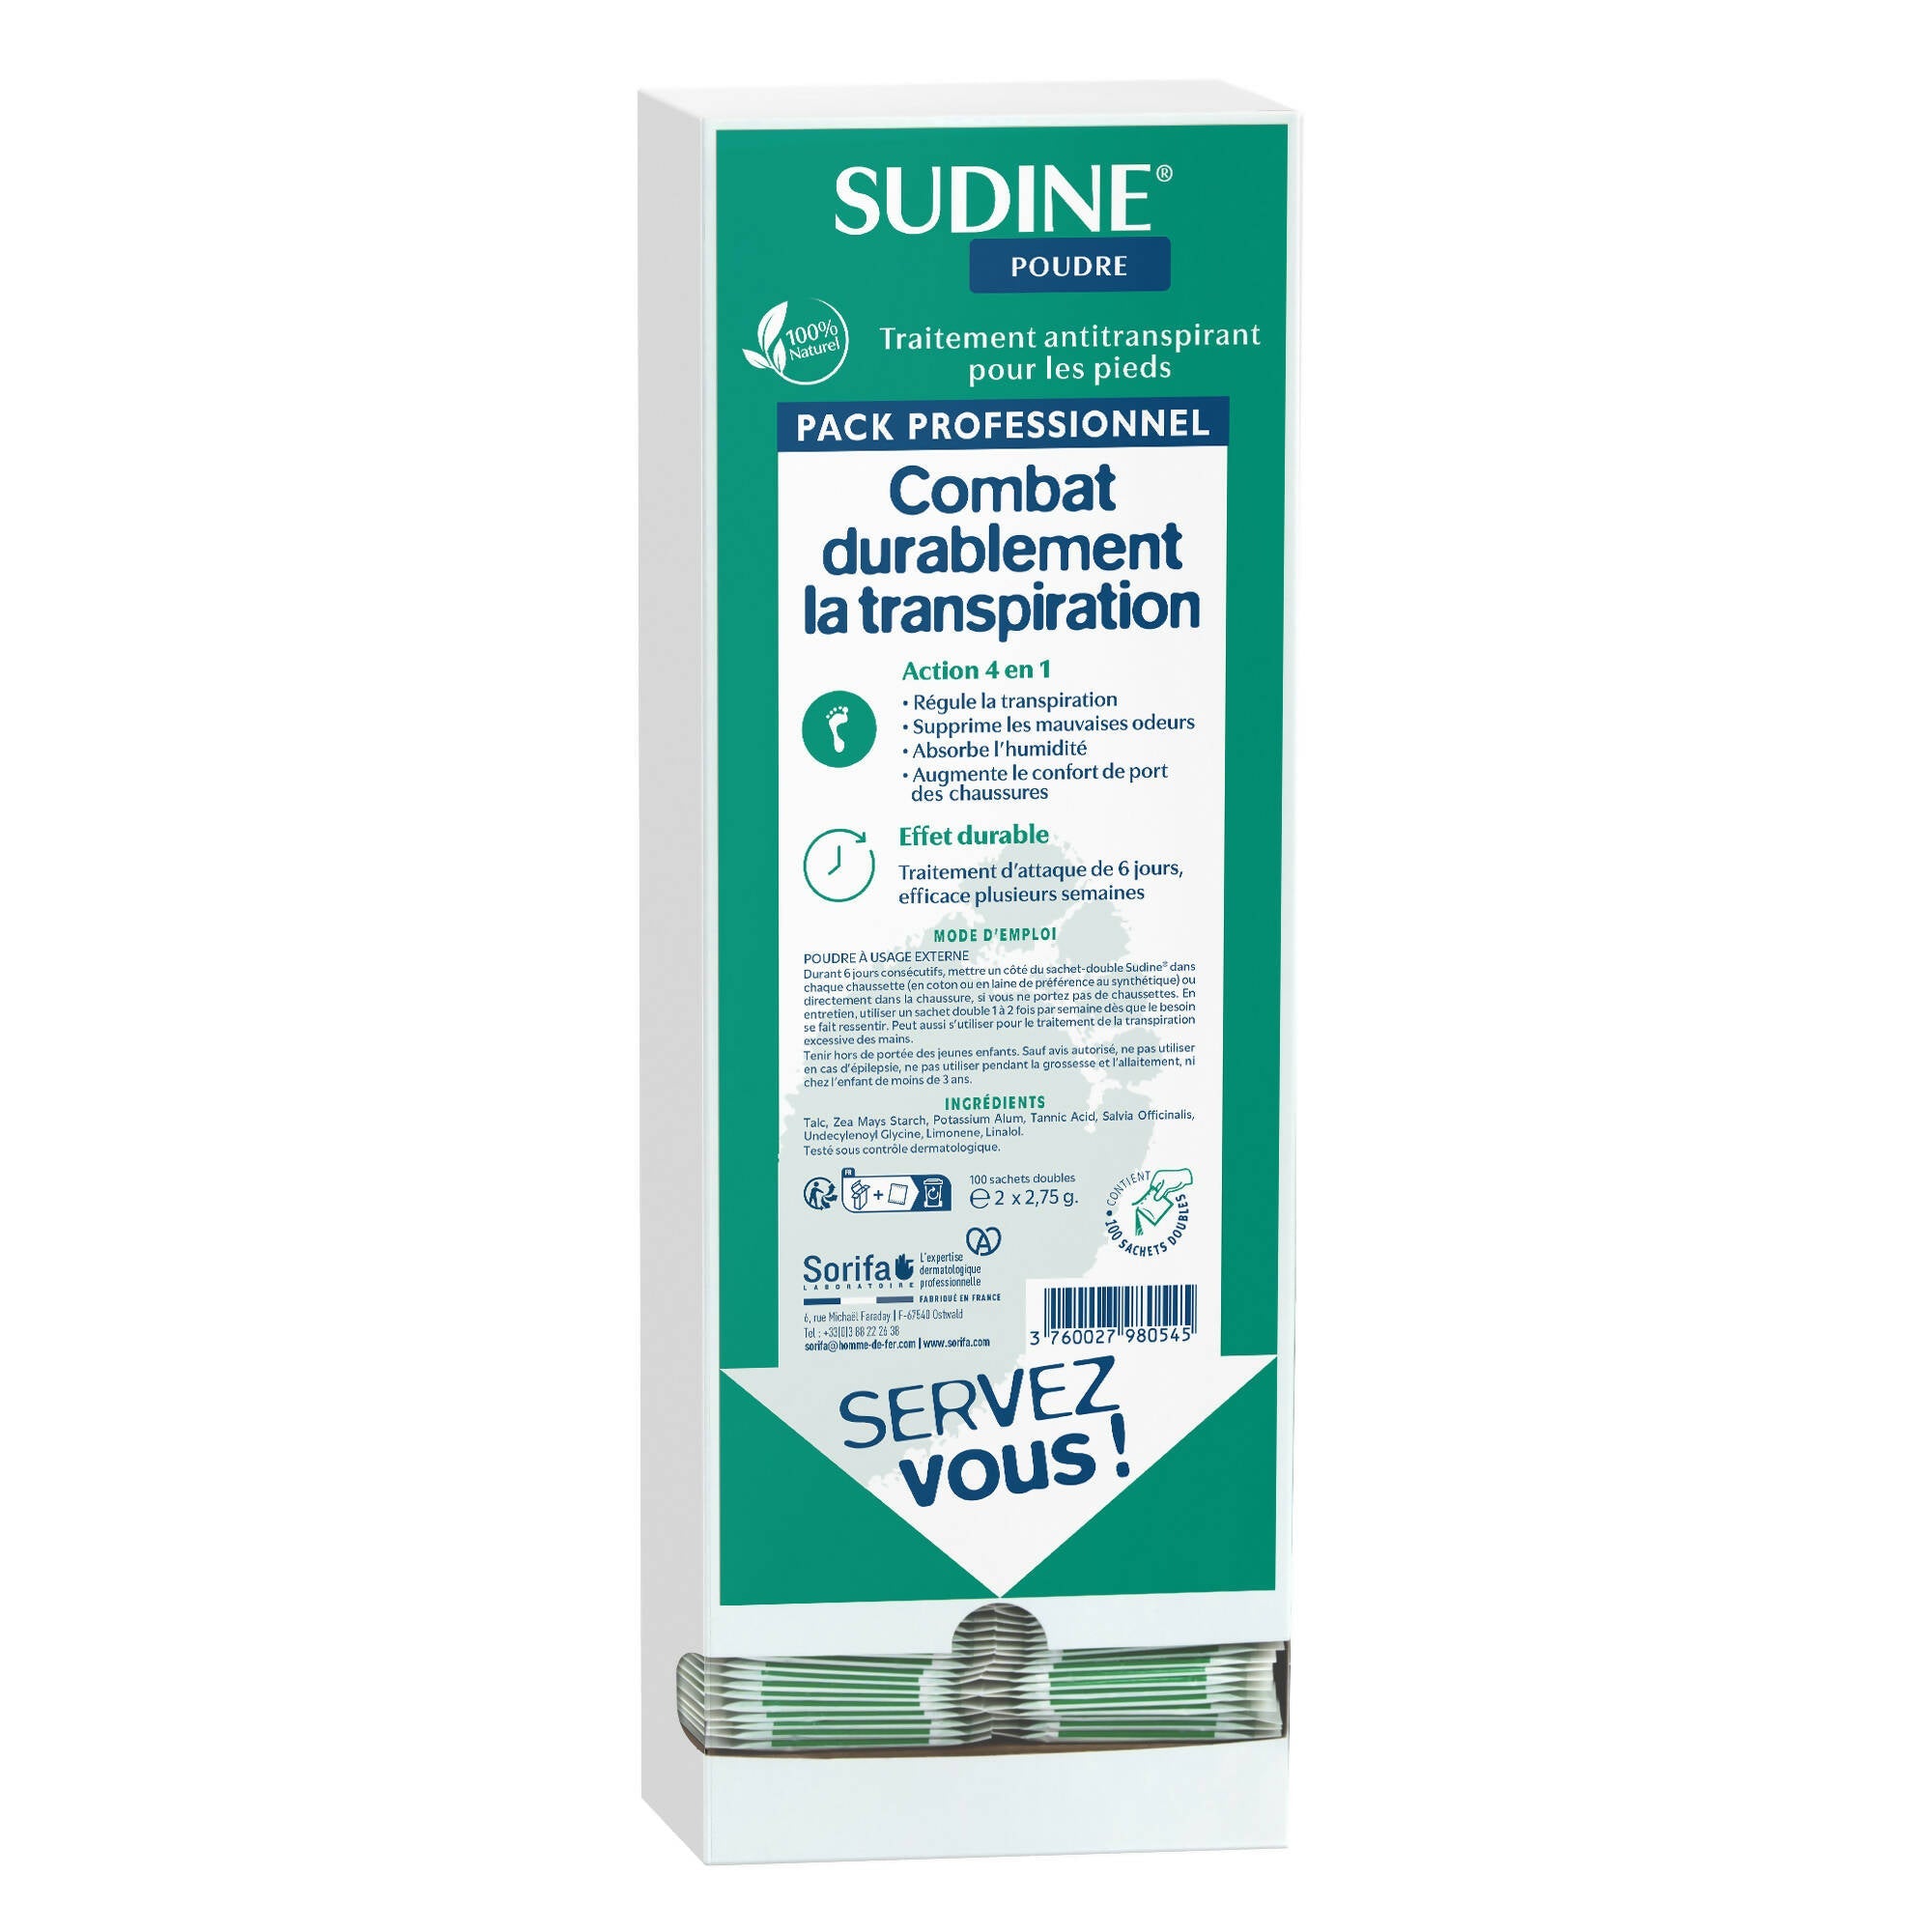 SORIFA - Complete box of 7 - Sudine Antiperspirant Treatment Powder - Foot - Regulates perspiration - Absorbs - Prevents fungal infections - Without aluminum salts - Made in France - Box of 100 double sachets